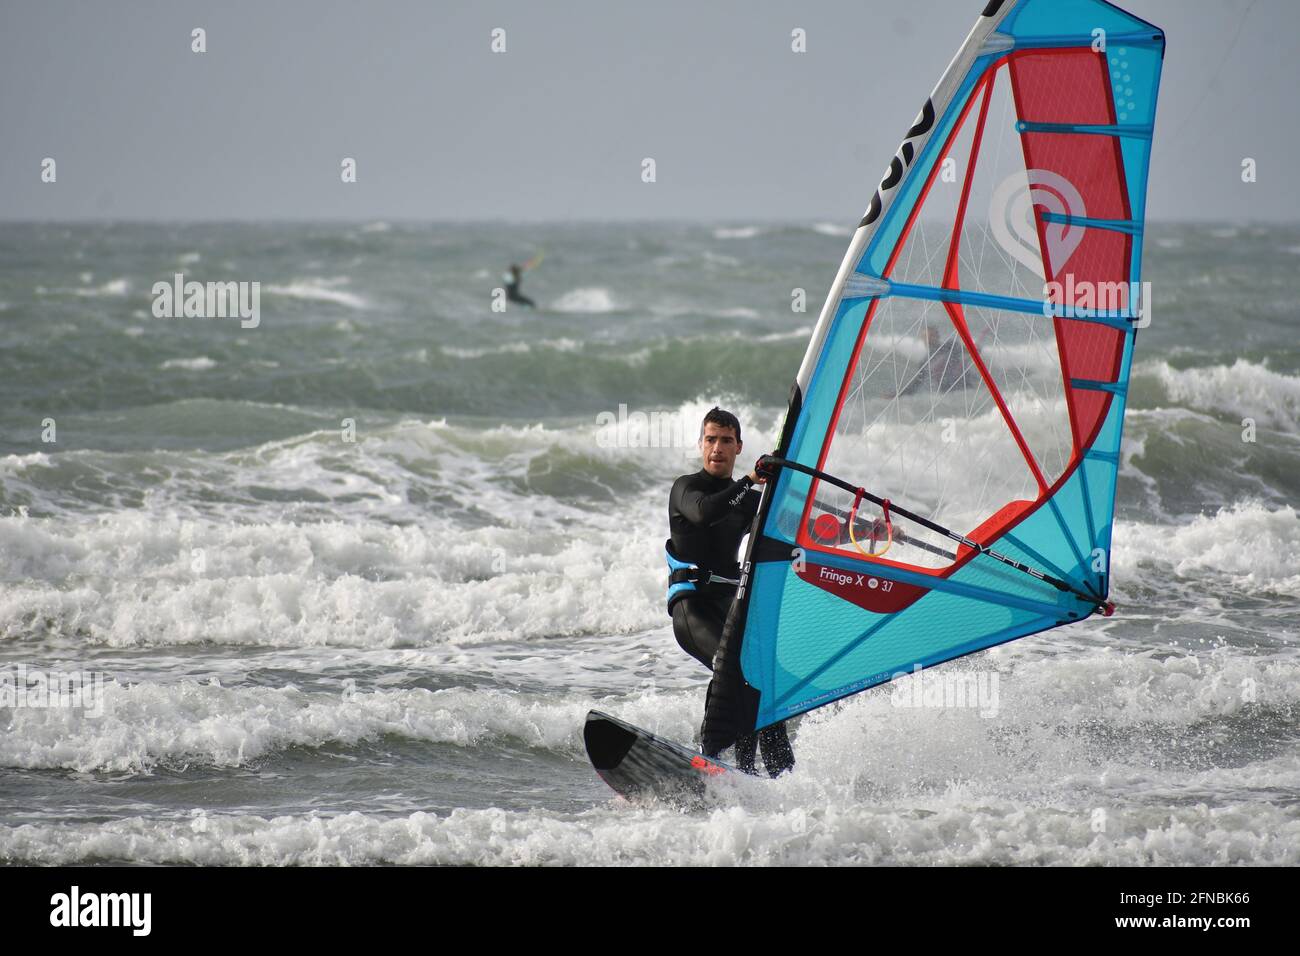 Wind surfer riding in Port Camargue, near Palavas les Flots, Carnon Plage  and Montpellier, Occitanie, South of France, Sud de France Stock Photo -  Alamy